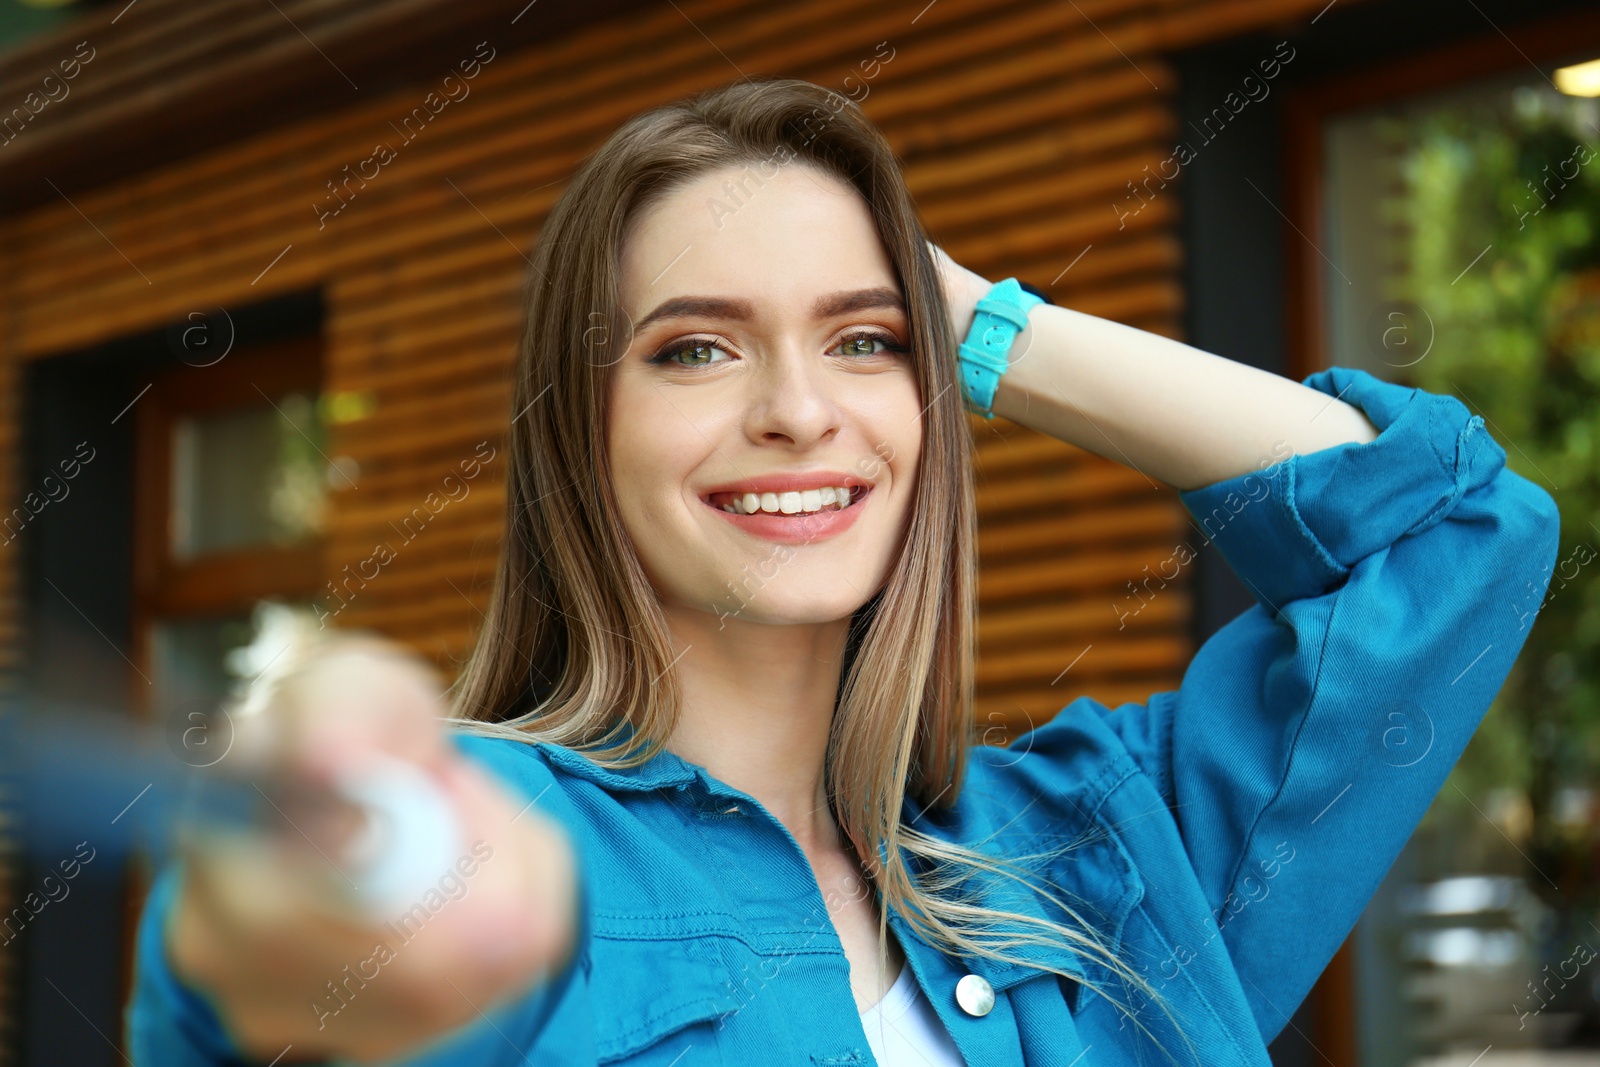 Photo of Happy young woman taking selfie on city street